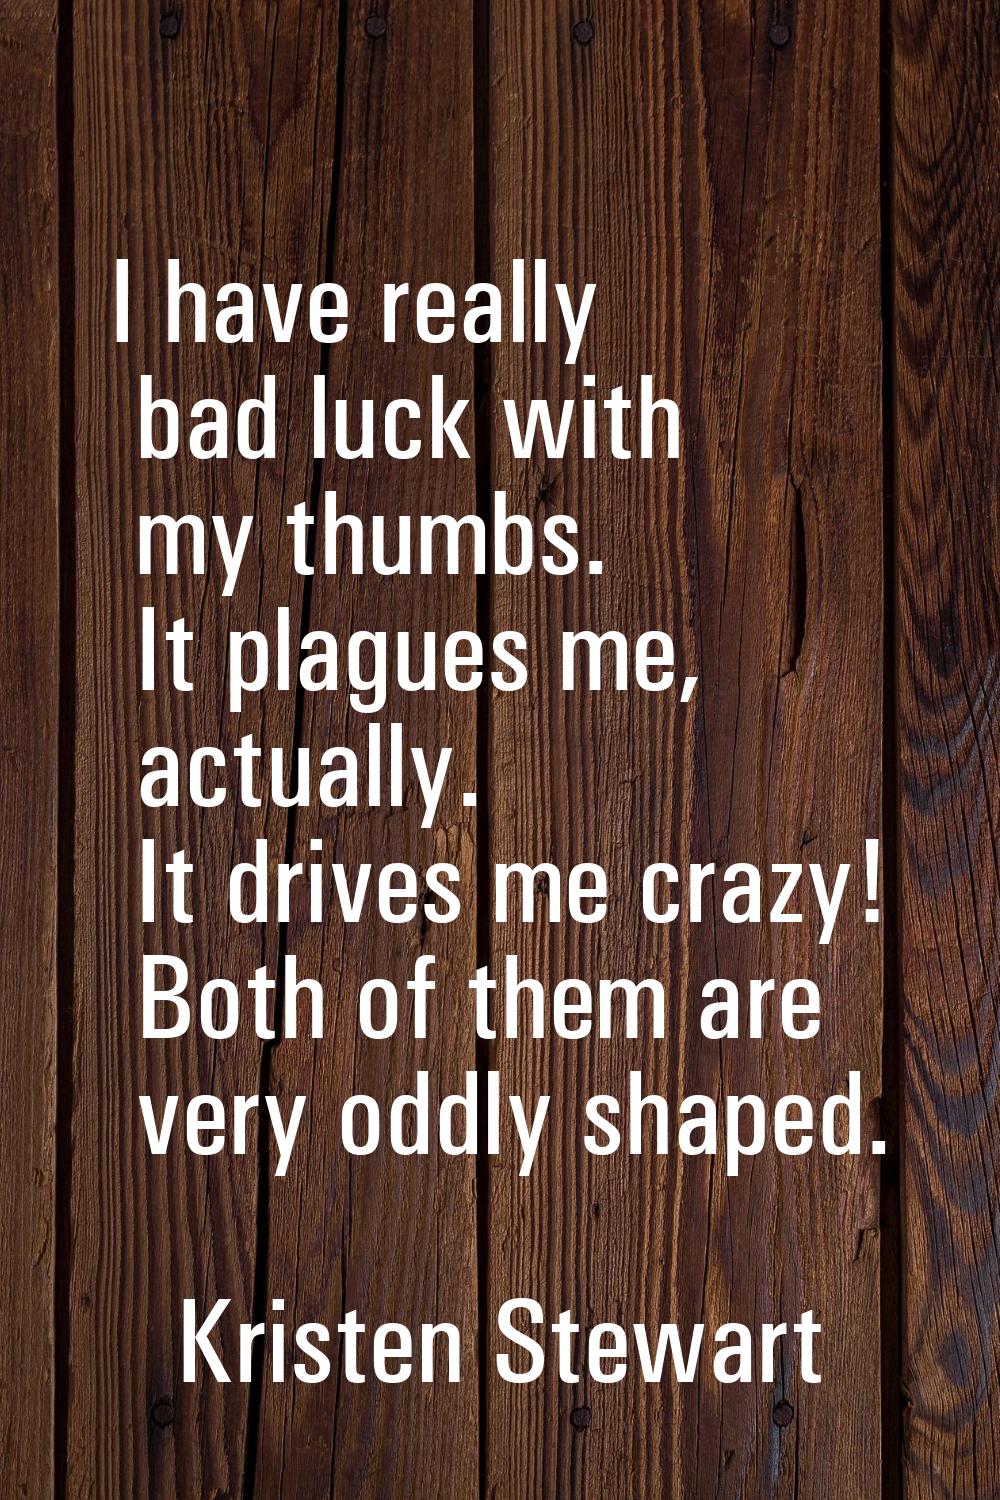 I have really bad luck with my thumbs. It plagues me, actually. It drives me crazy! Both of them ar